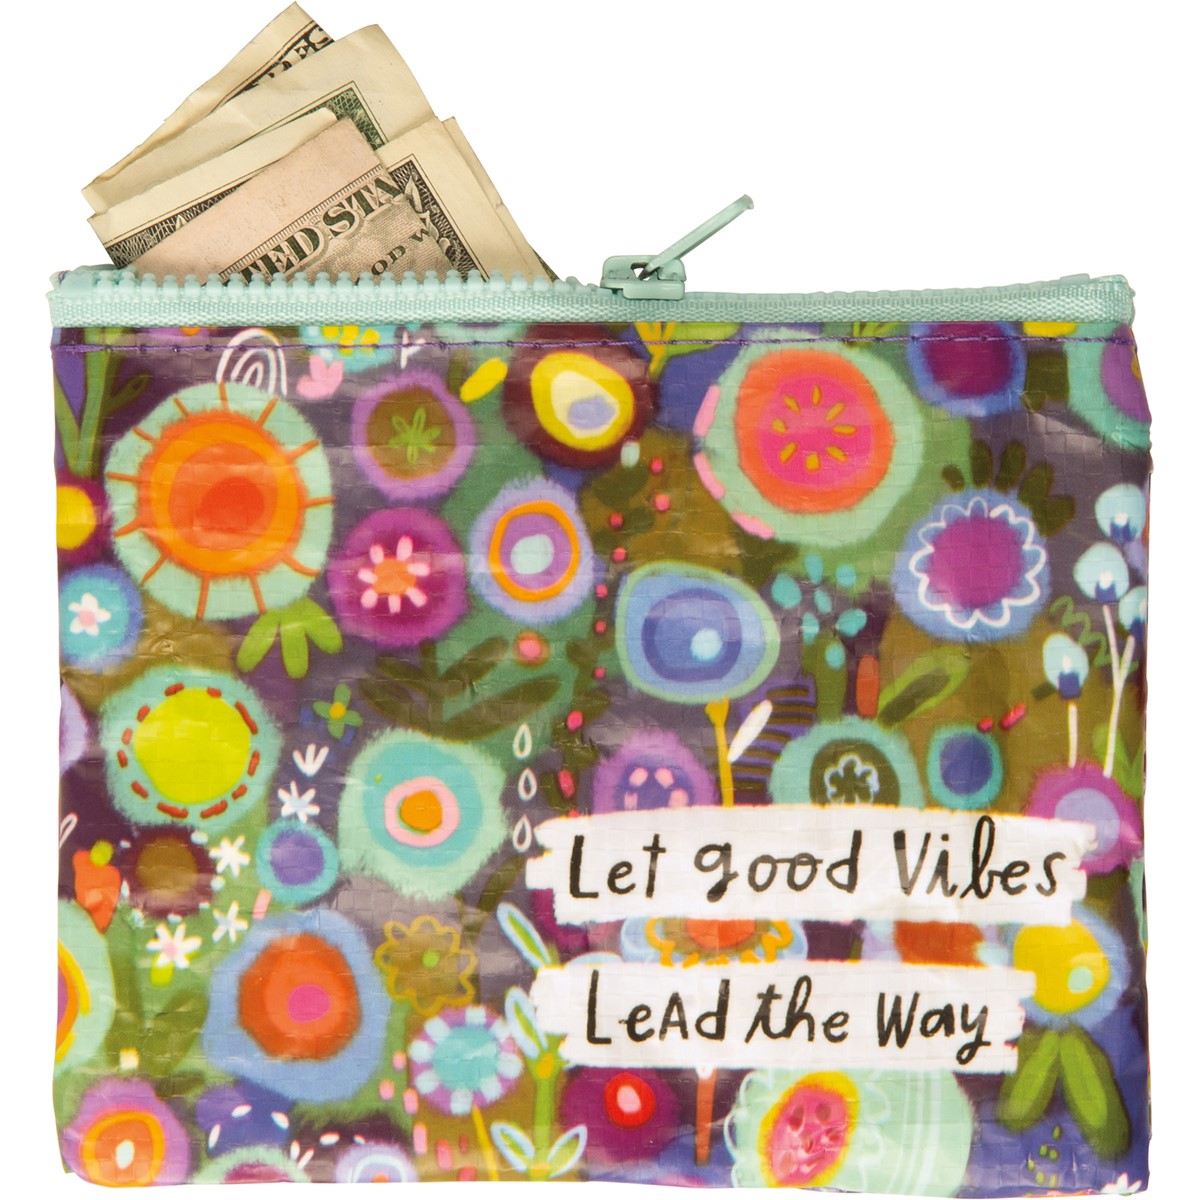 Coin Purse - "Let Good Vibes Lead The Way"